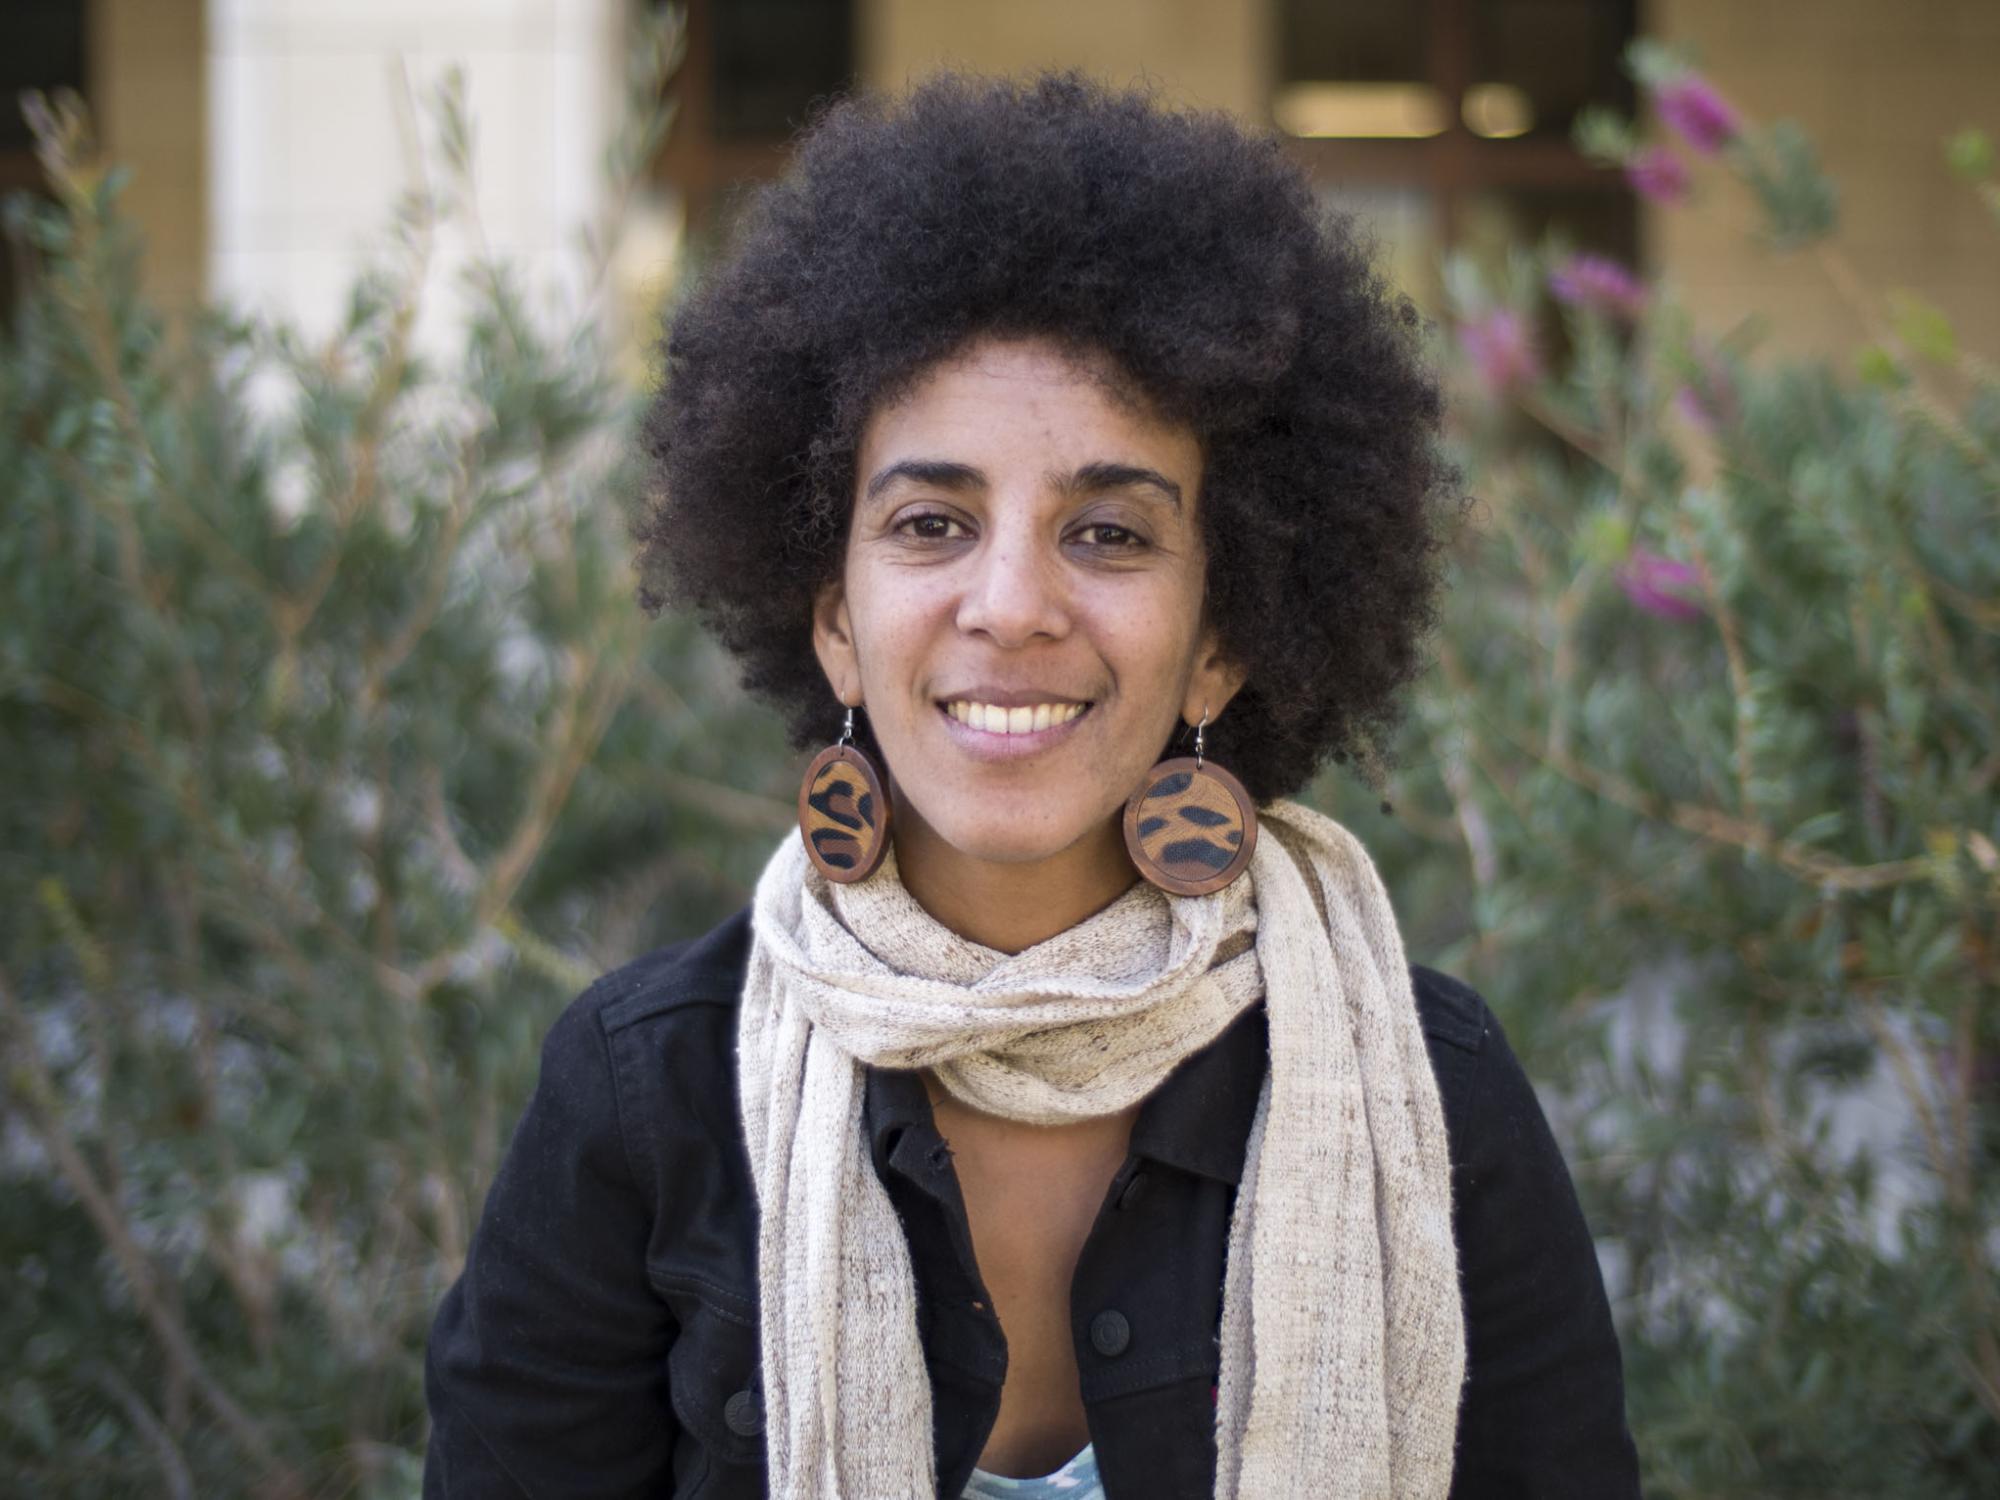 Tech activist Timnit Gebru to deliver distinguished lecture on ethical AI